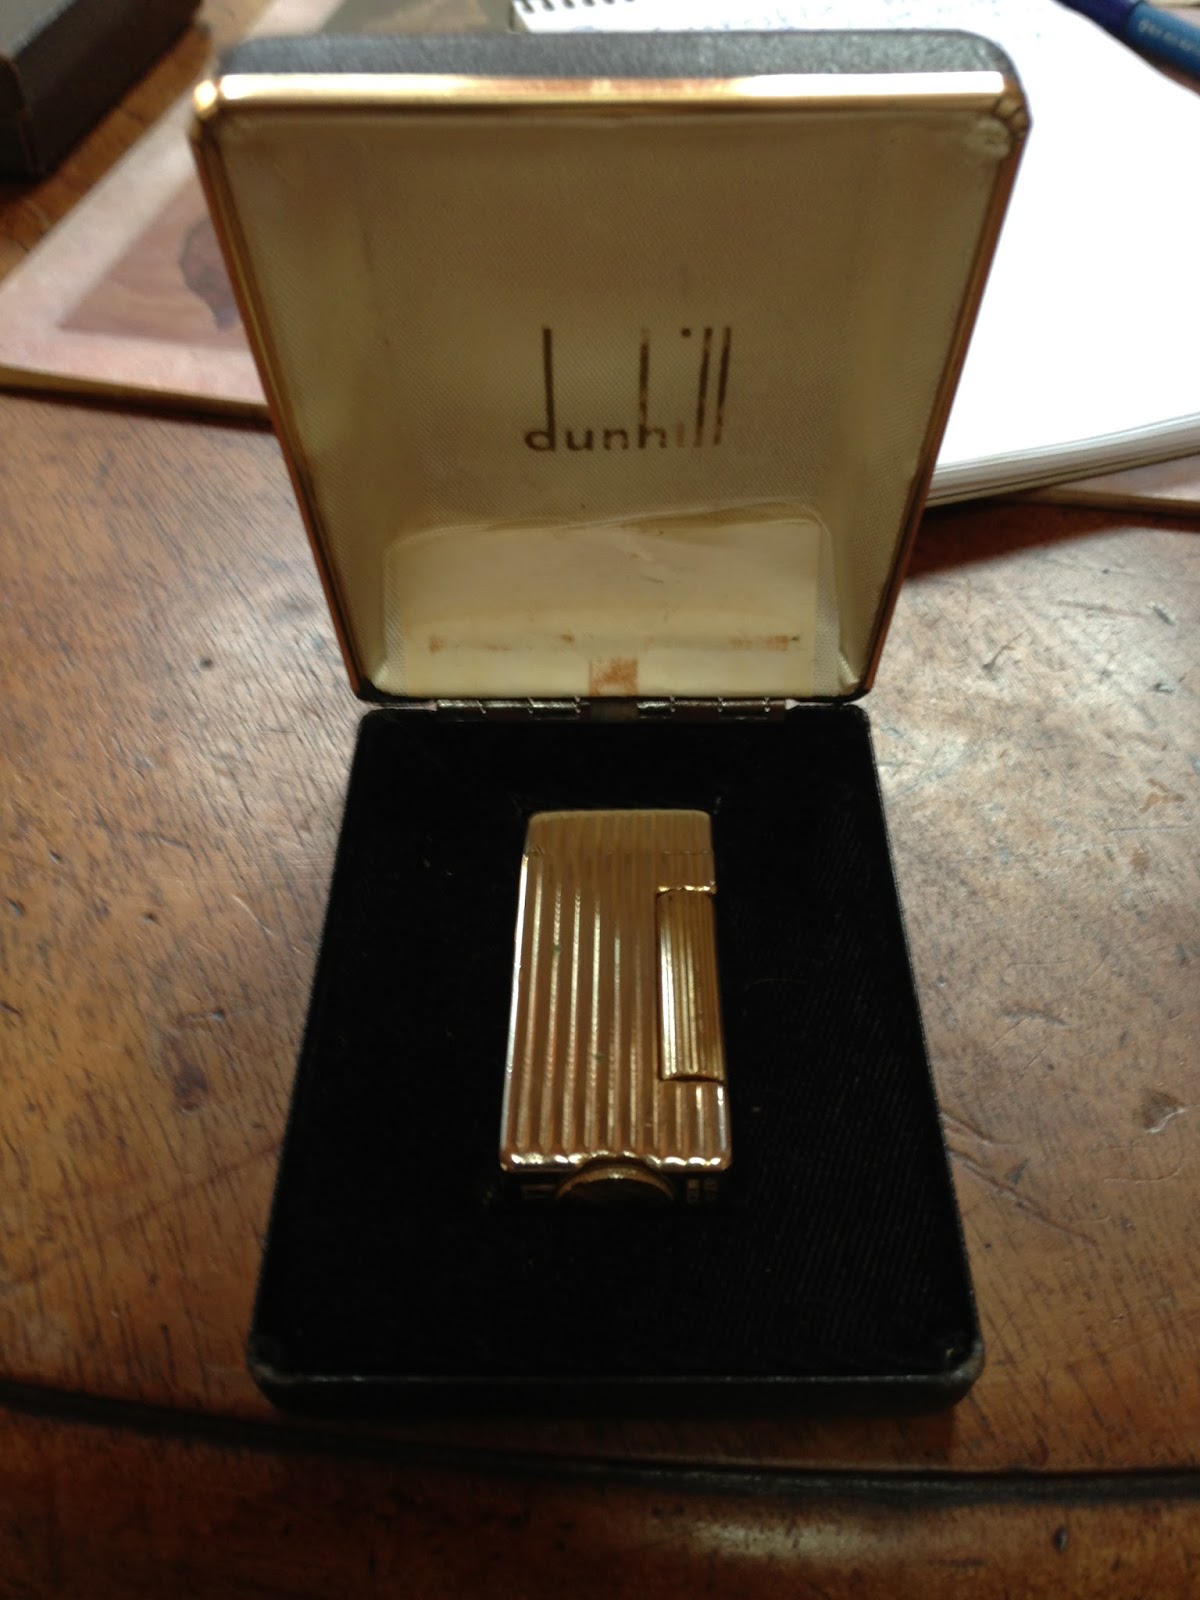 Dunhill Lighter Collection: Dunhill Lighter Photographs with Information